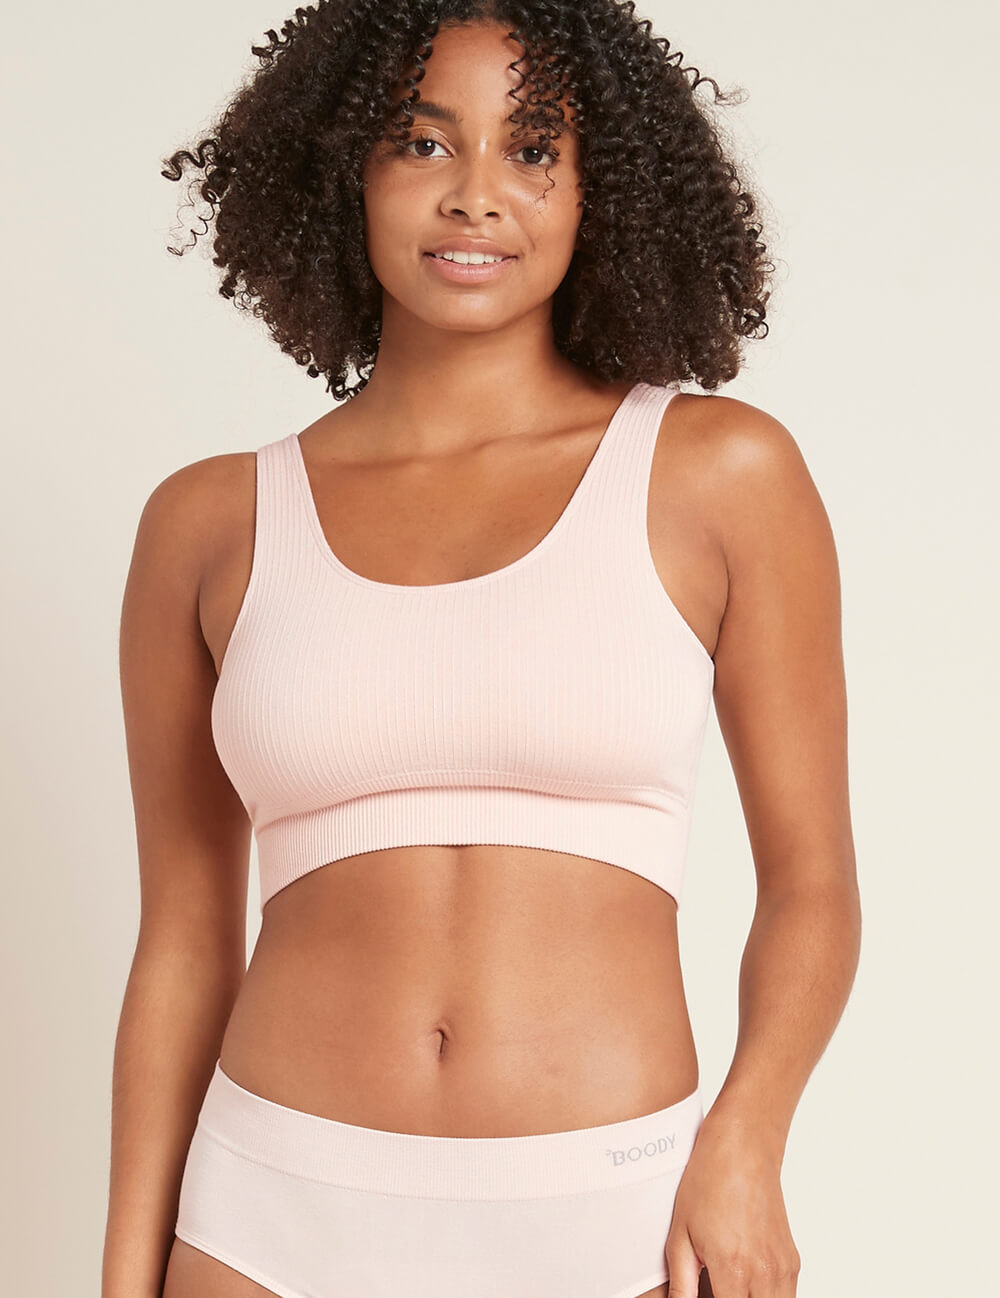 Boody Bamboo Viscose Ribbed Seamless Bra in Powder Pink Front View